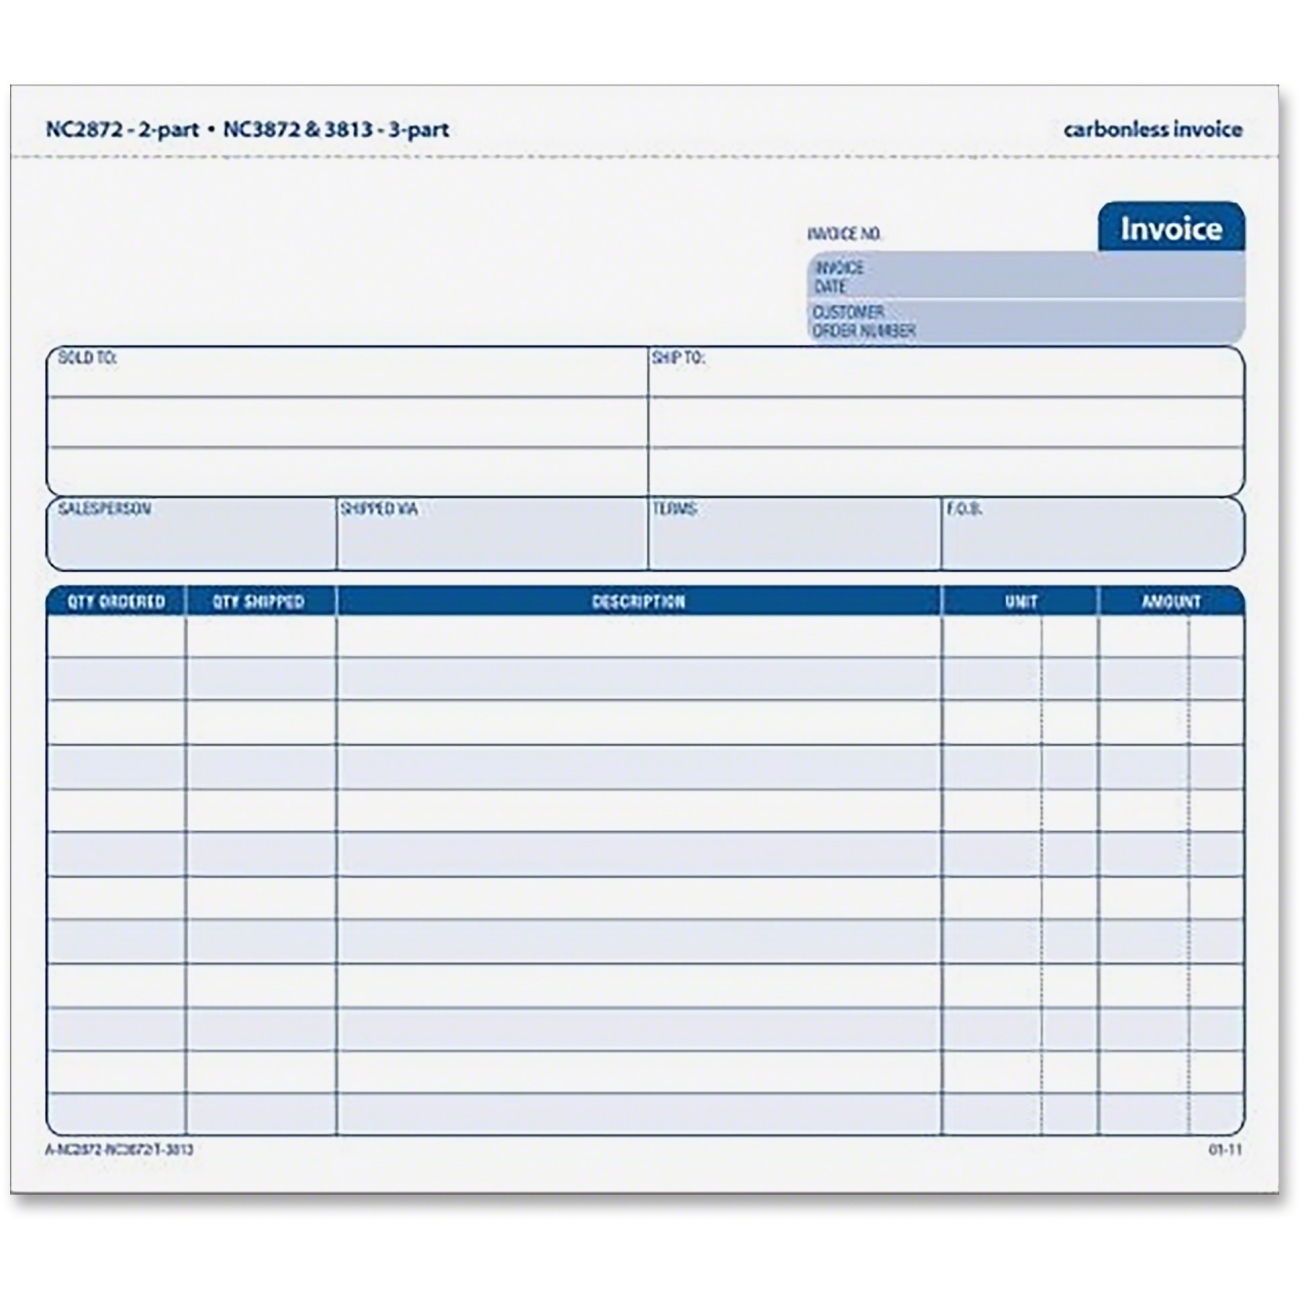 tops 3813 black image carbonless invoice forms 3 part carbonless carbonless invoice forms